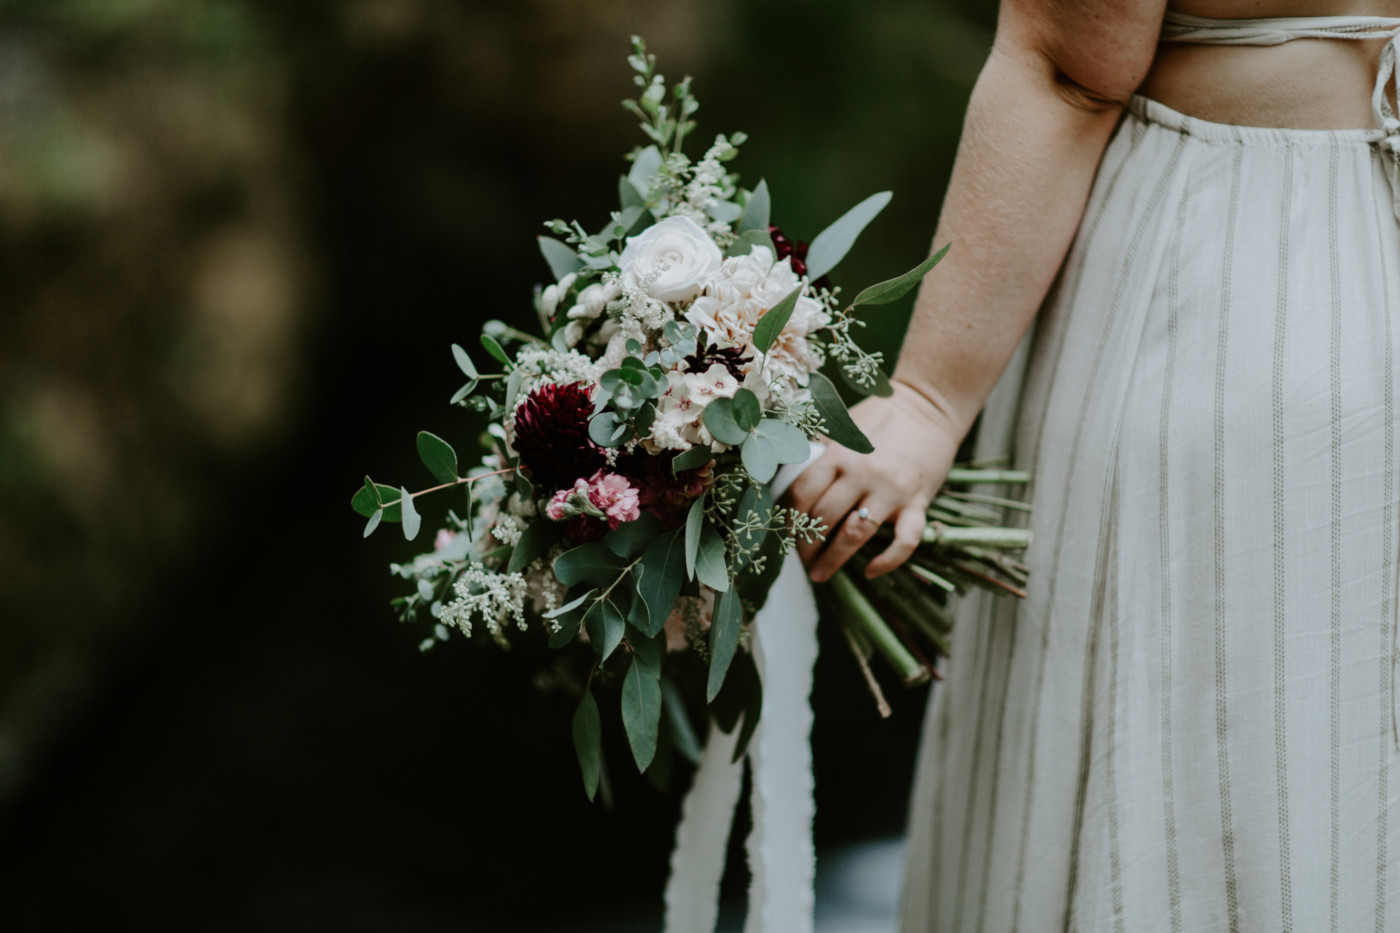 Audrey's bouquet hangs by her side. Elopement wedding photography at Bridal Veil Falls by Sienna Plus Josh.